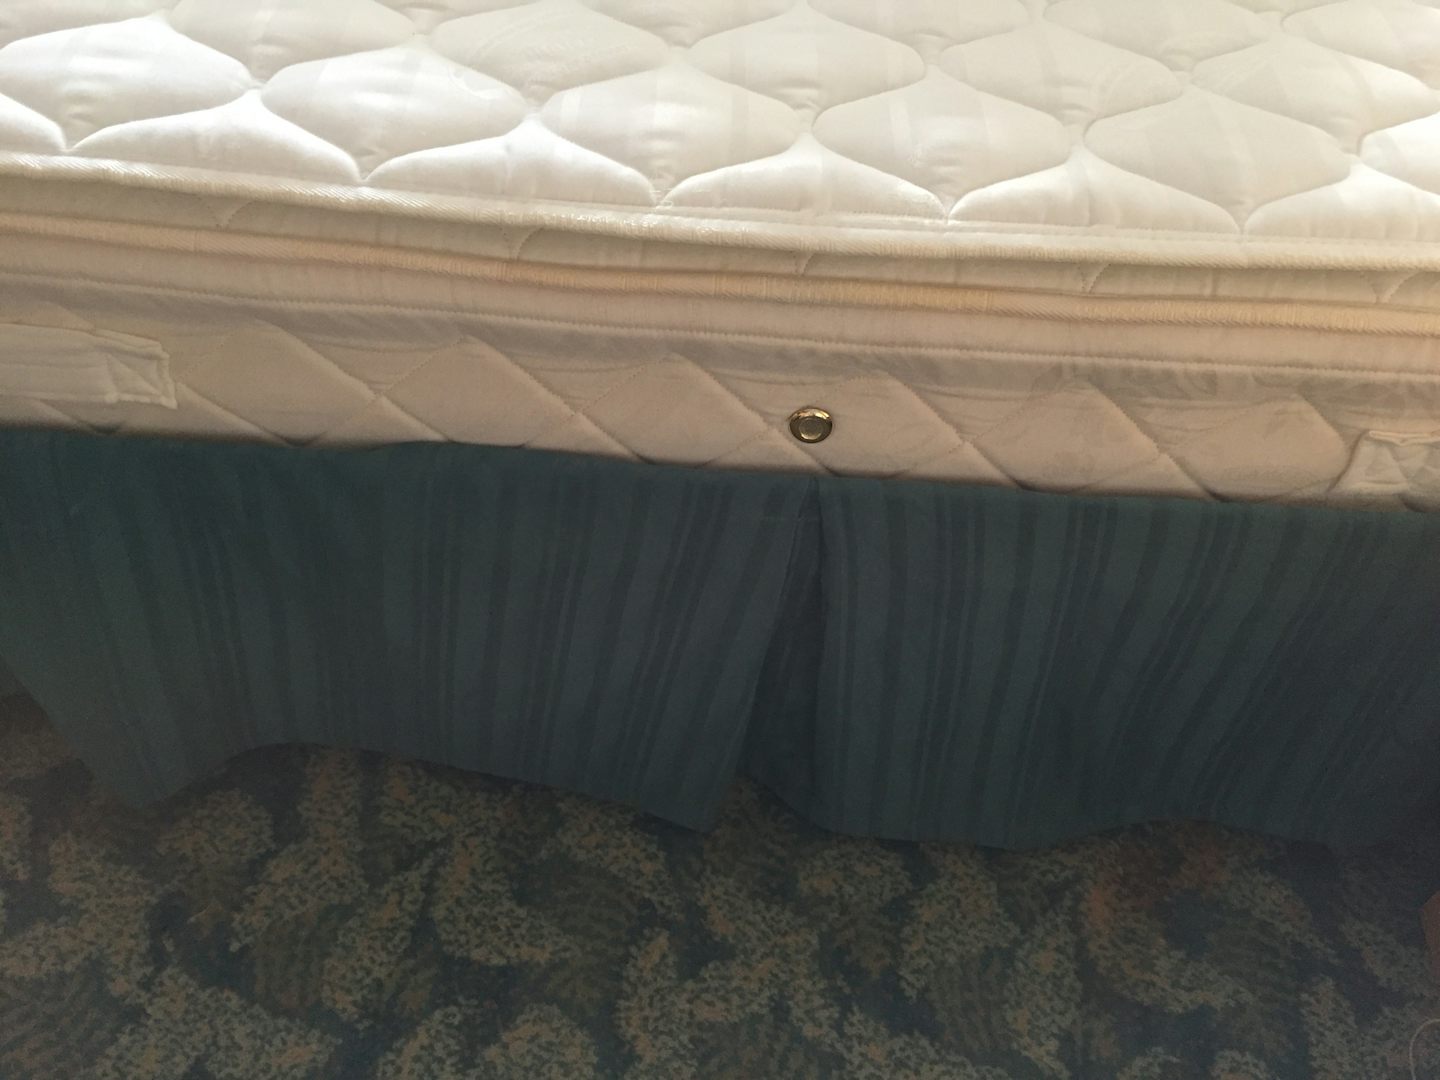 flat and old side view mattress